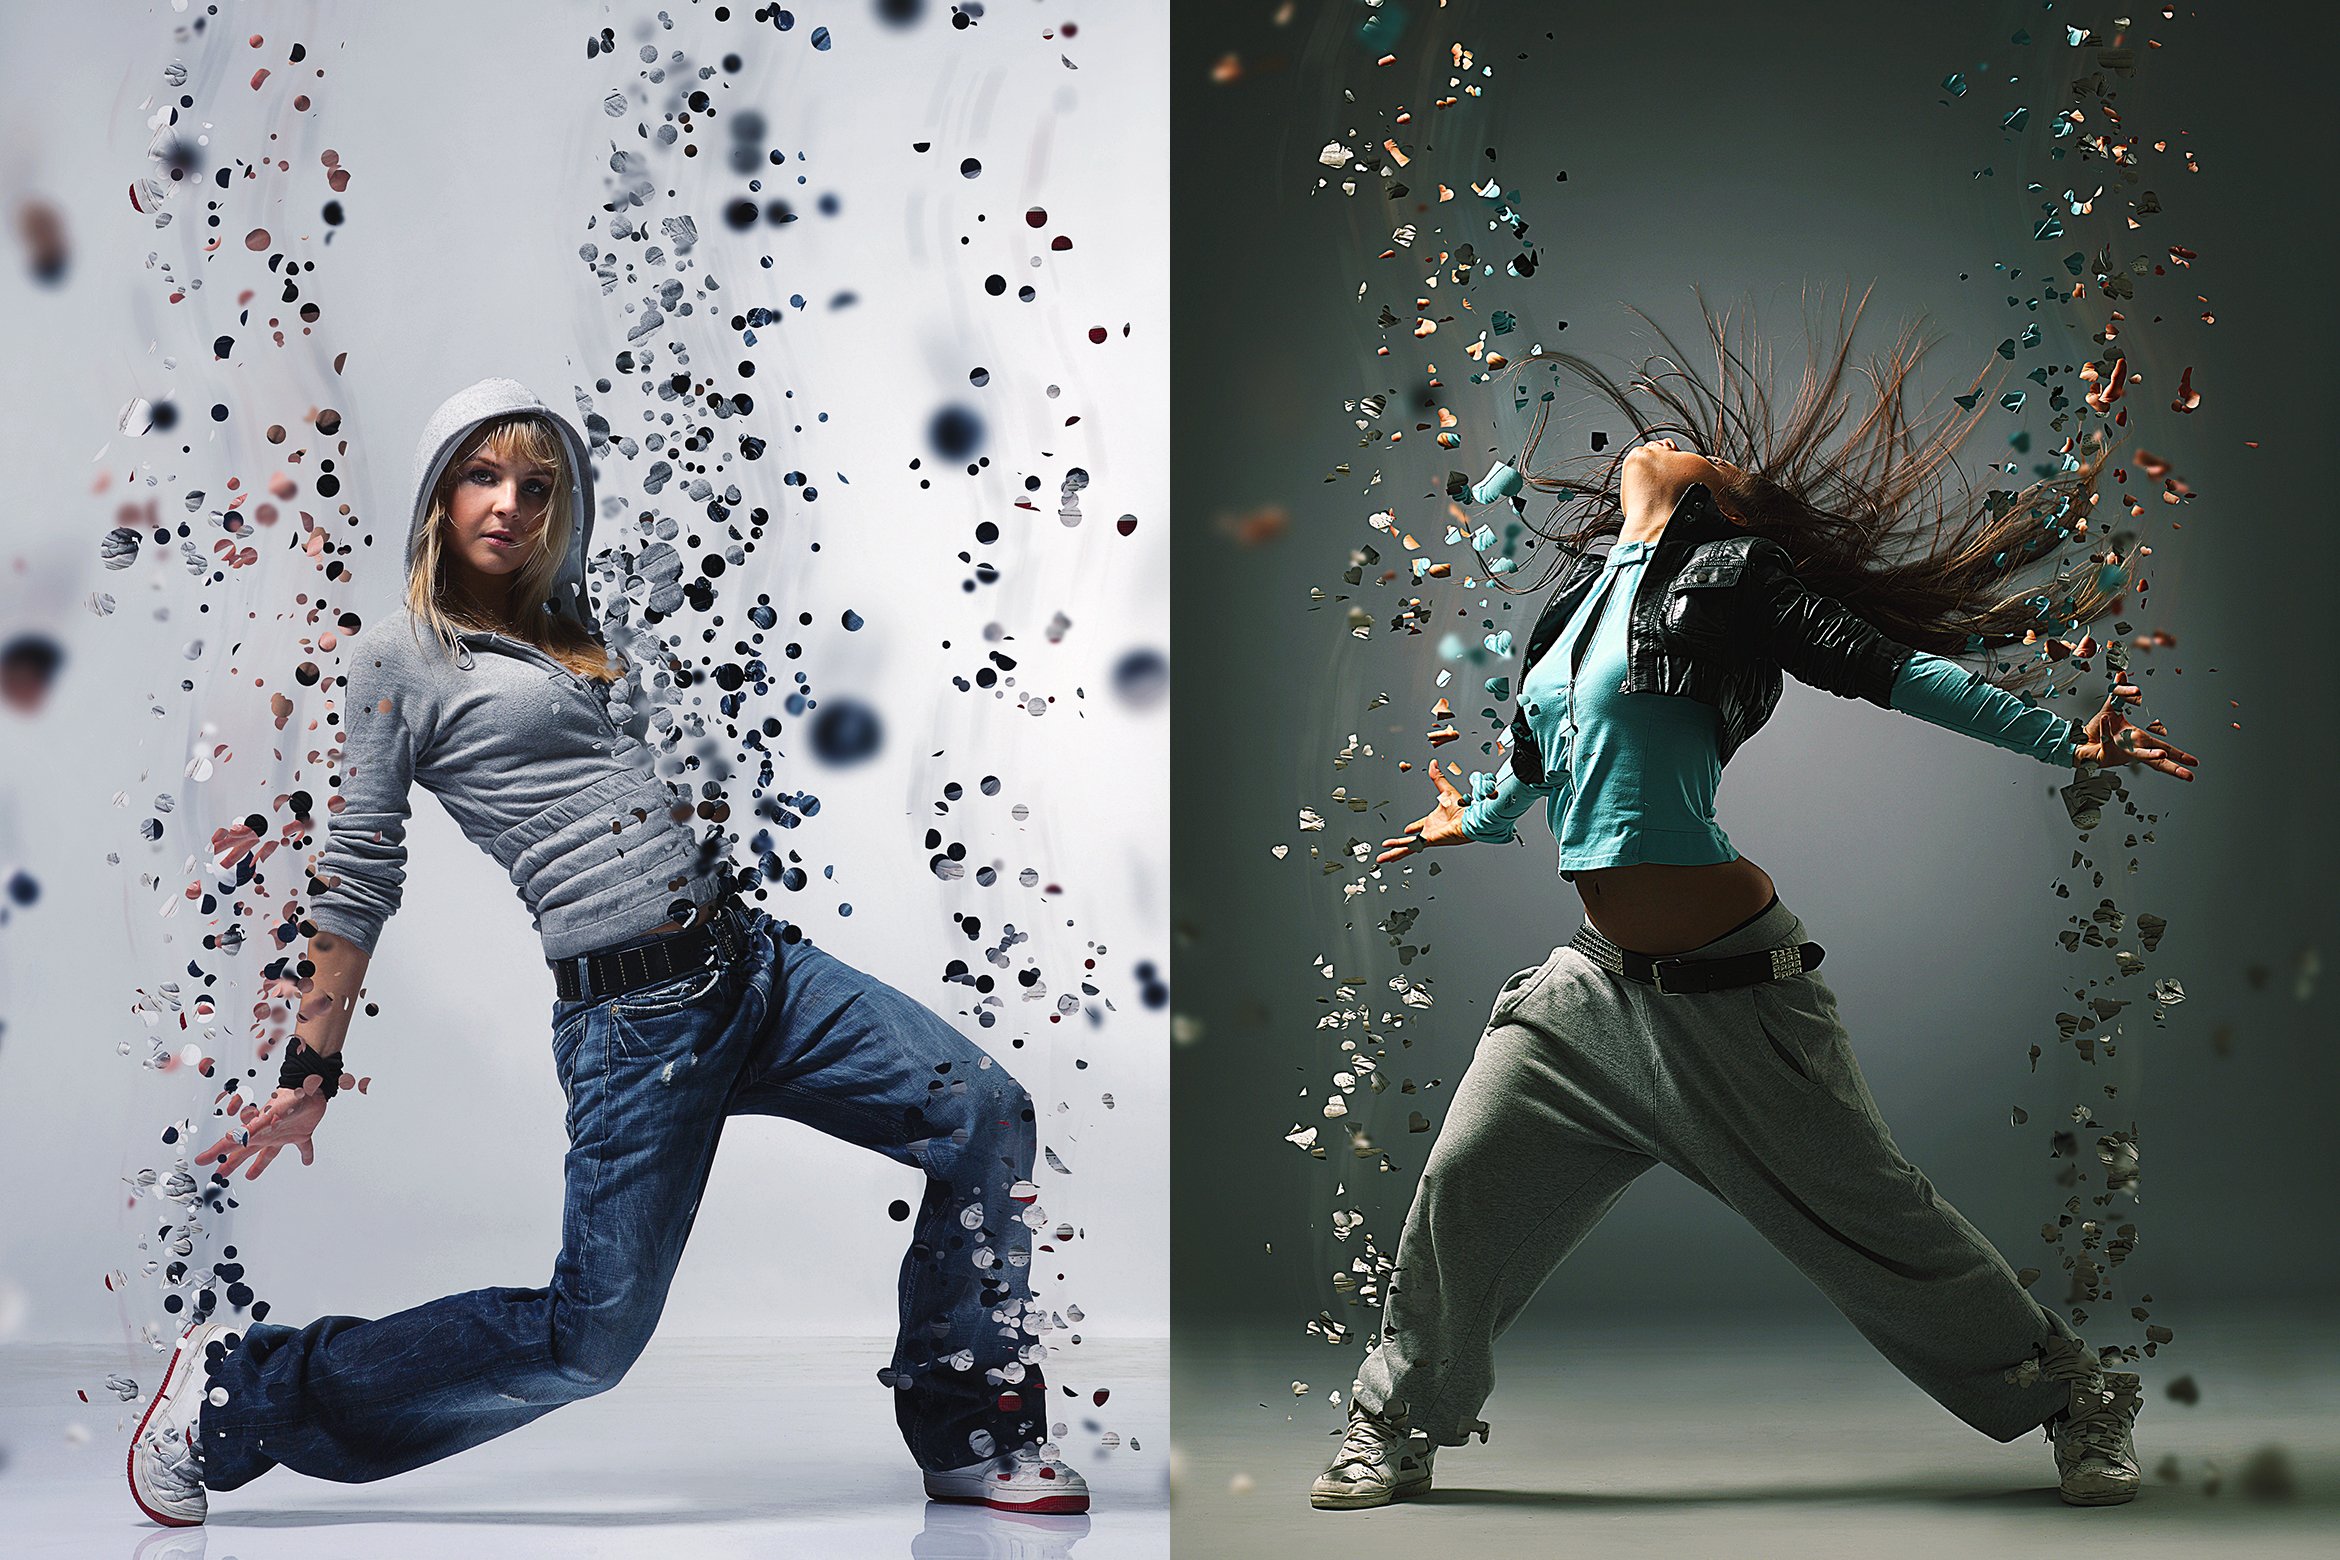 Dispersion Photoshop Actioncover image.